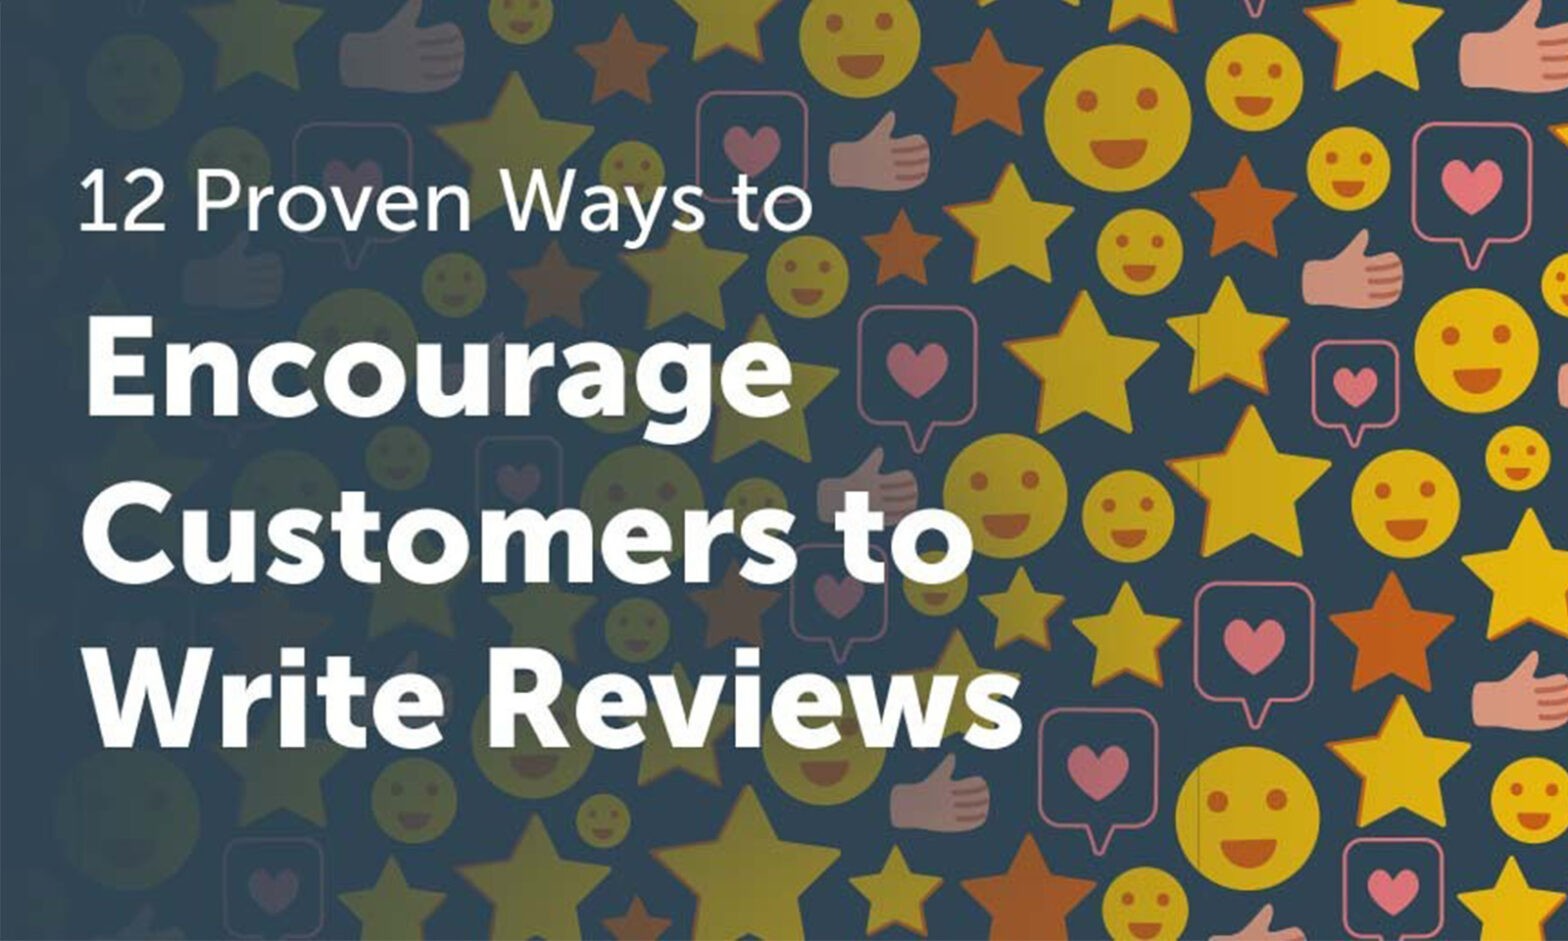 How to Encourage Customer Reviews Online